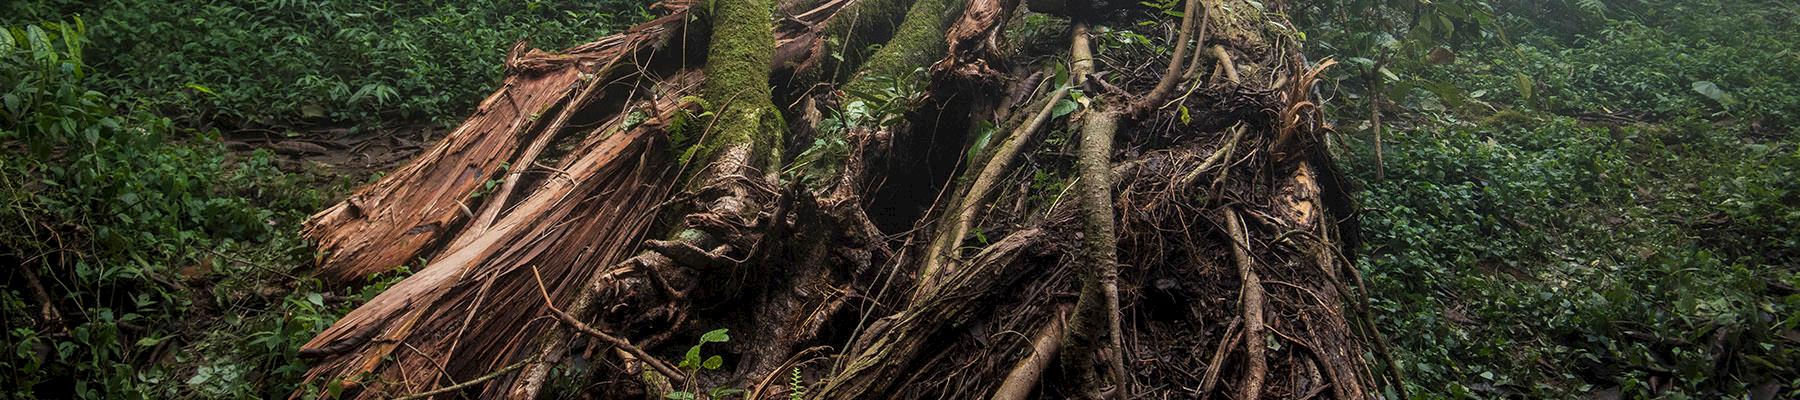 Felled tree in the forest at the base of Mount Cameroon © A. Walmsley / TRAFFIC